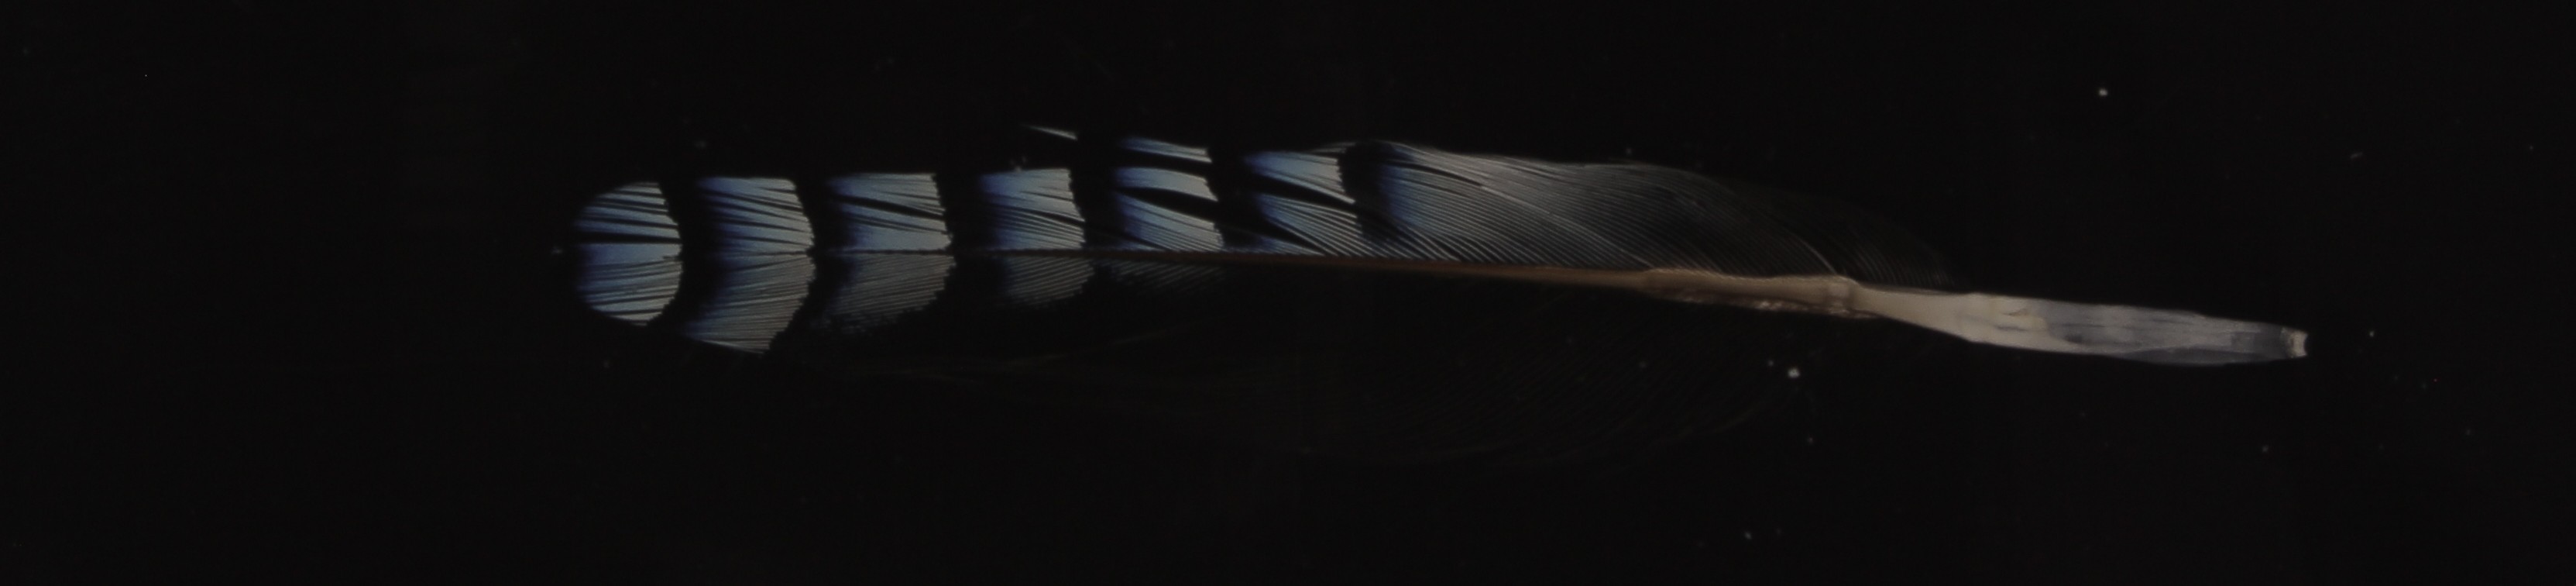 Inclusion, a jay feather black background